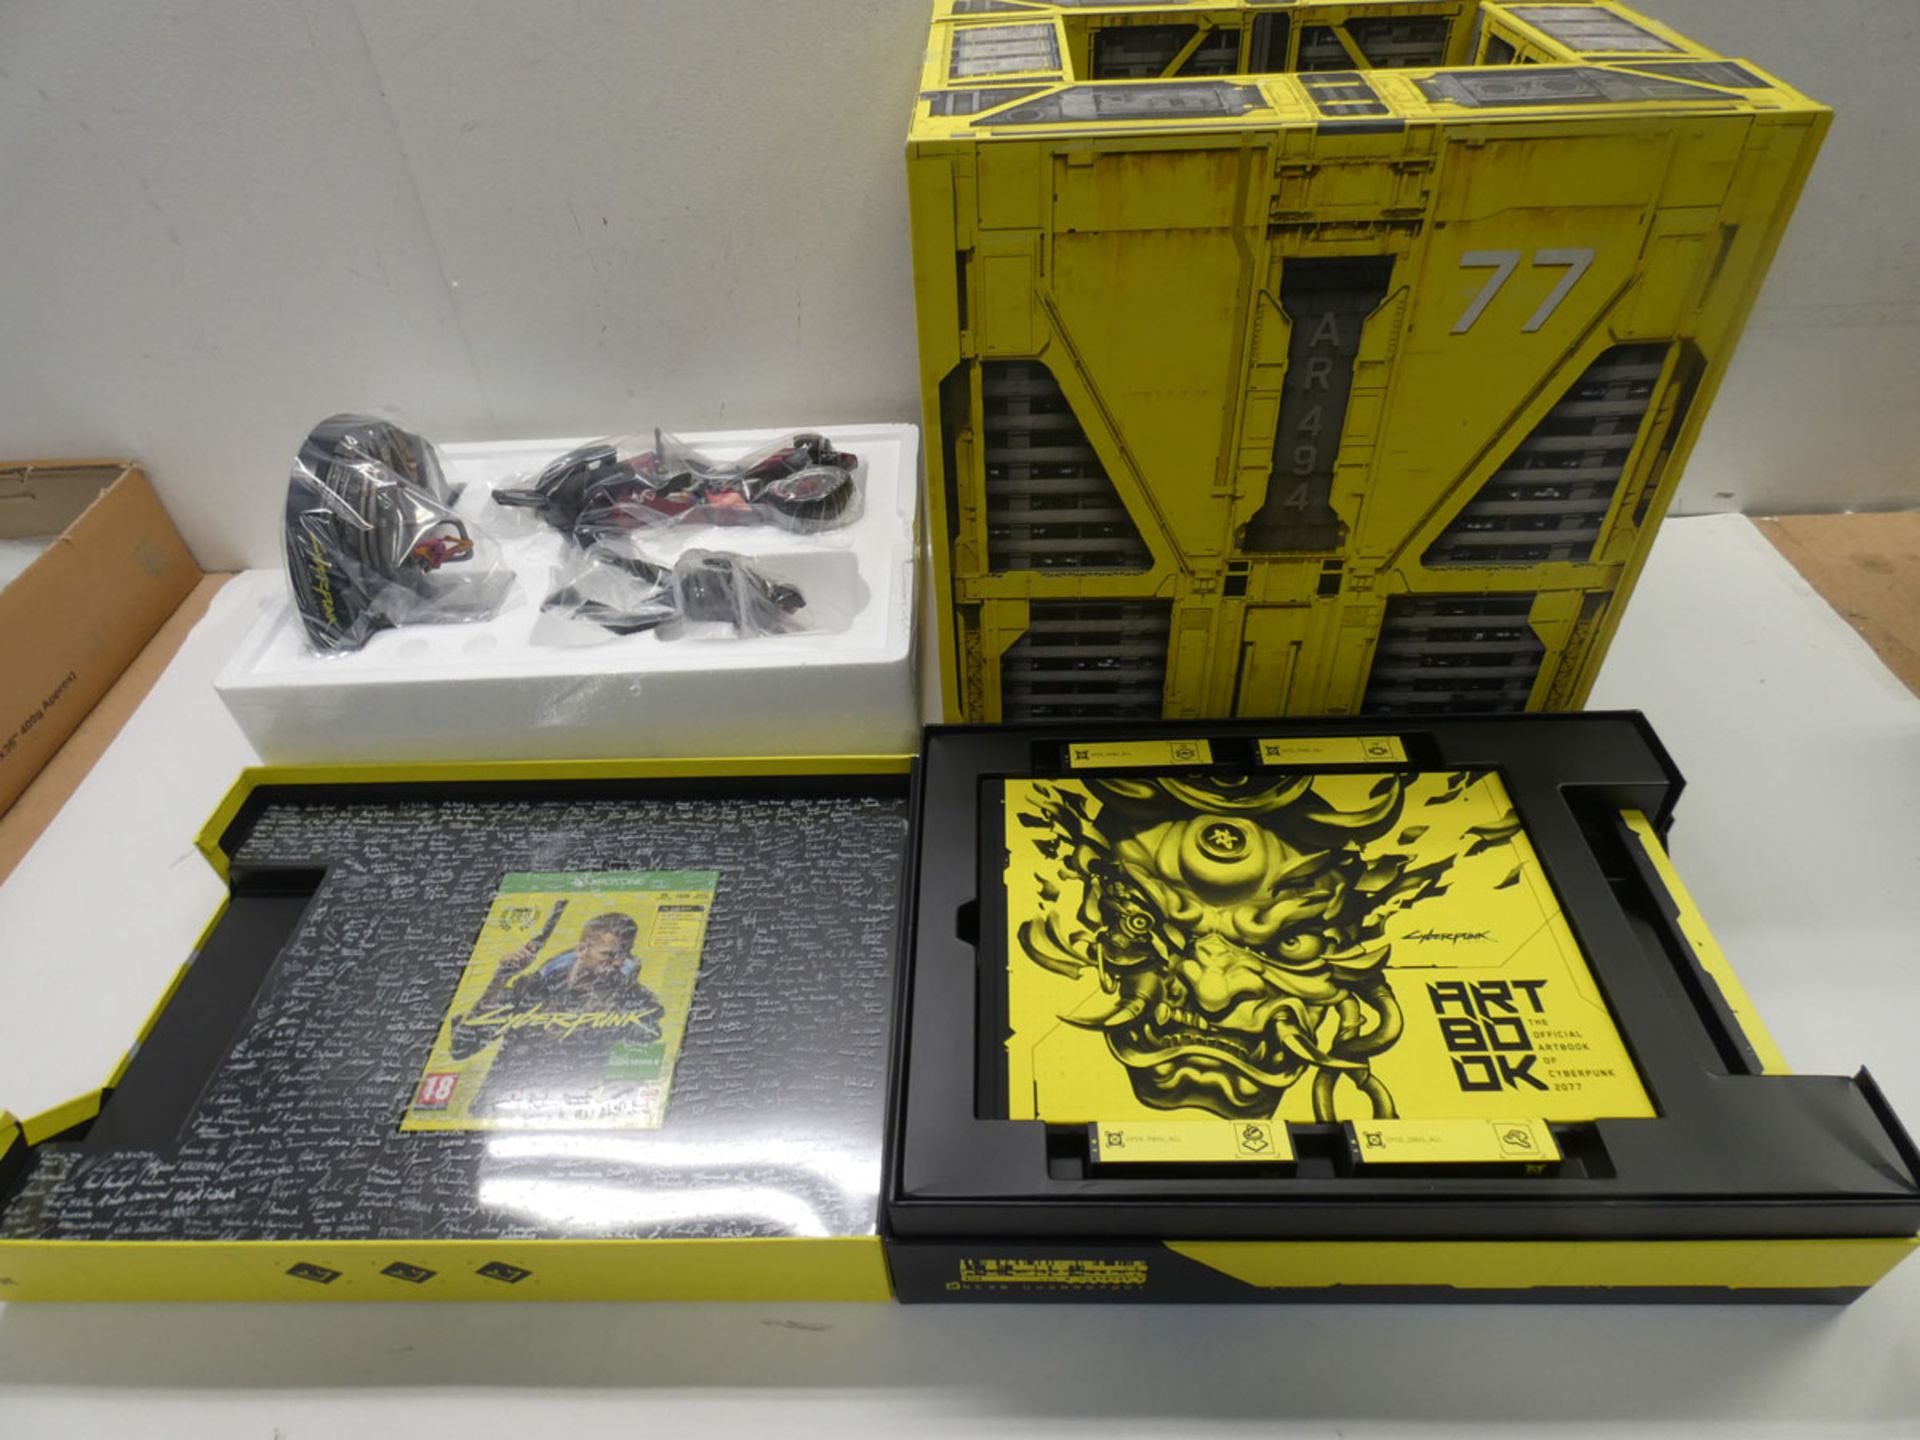 CyberPunk 2077 XBOX ONE Collectors edition Game with '' V in Action '' figurine , ,Steelbook case, - Image 3 of 4